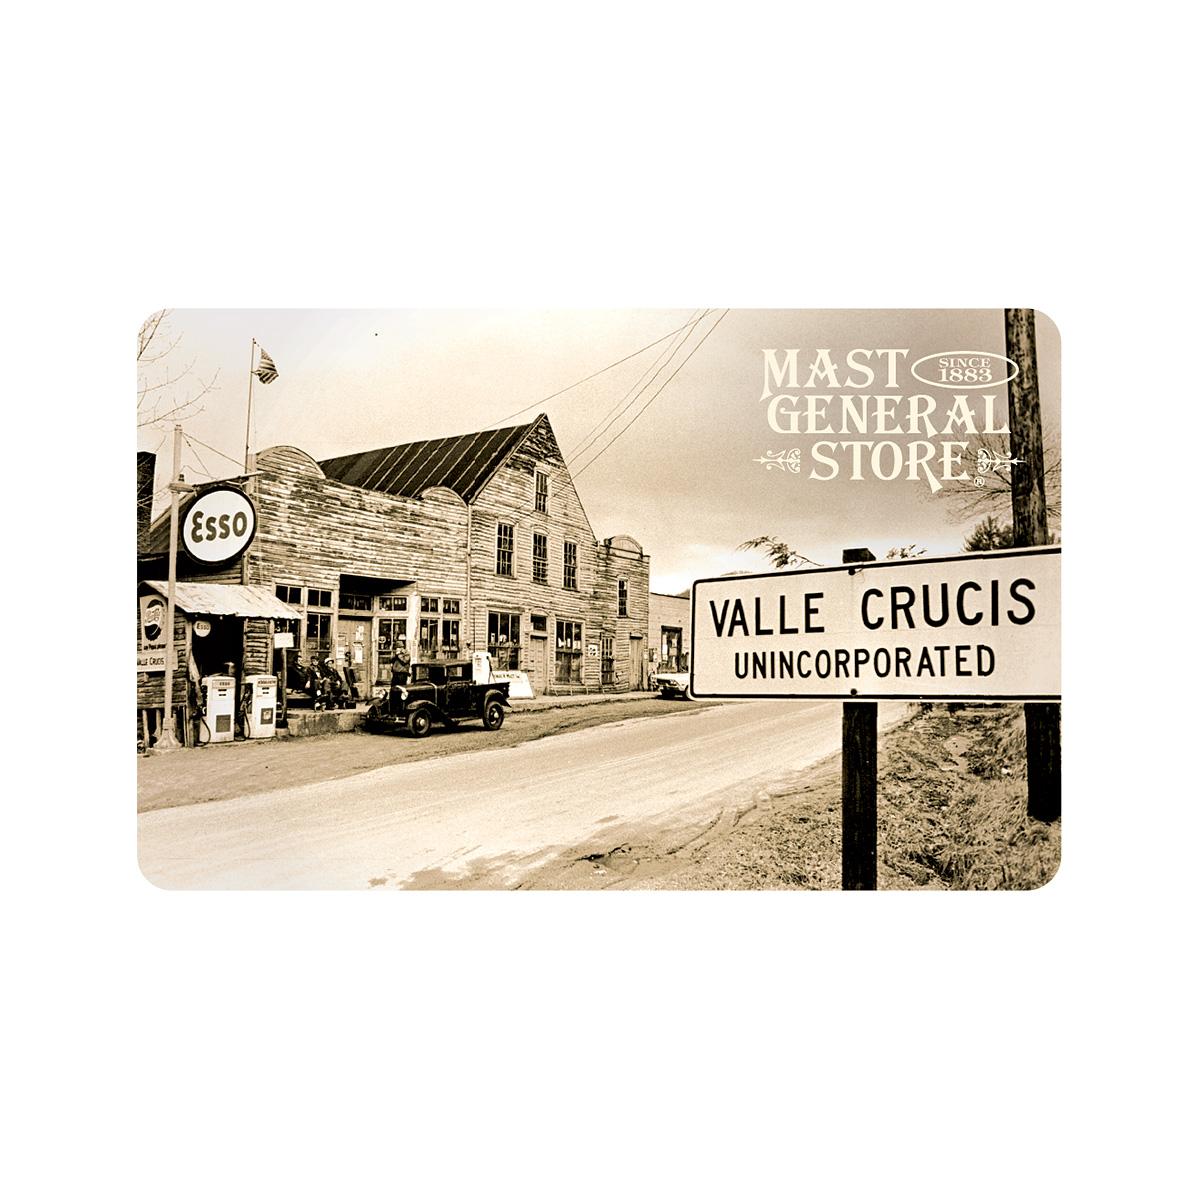  Mast General Store Old Store Gift Card